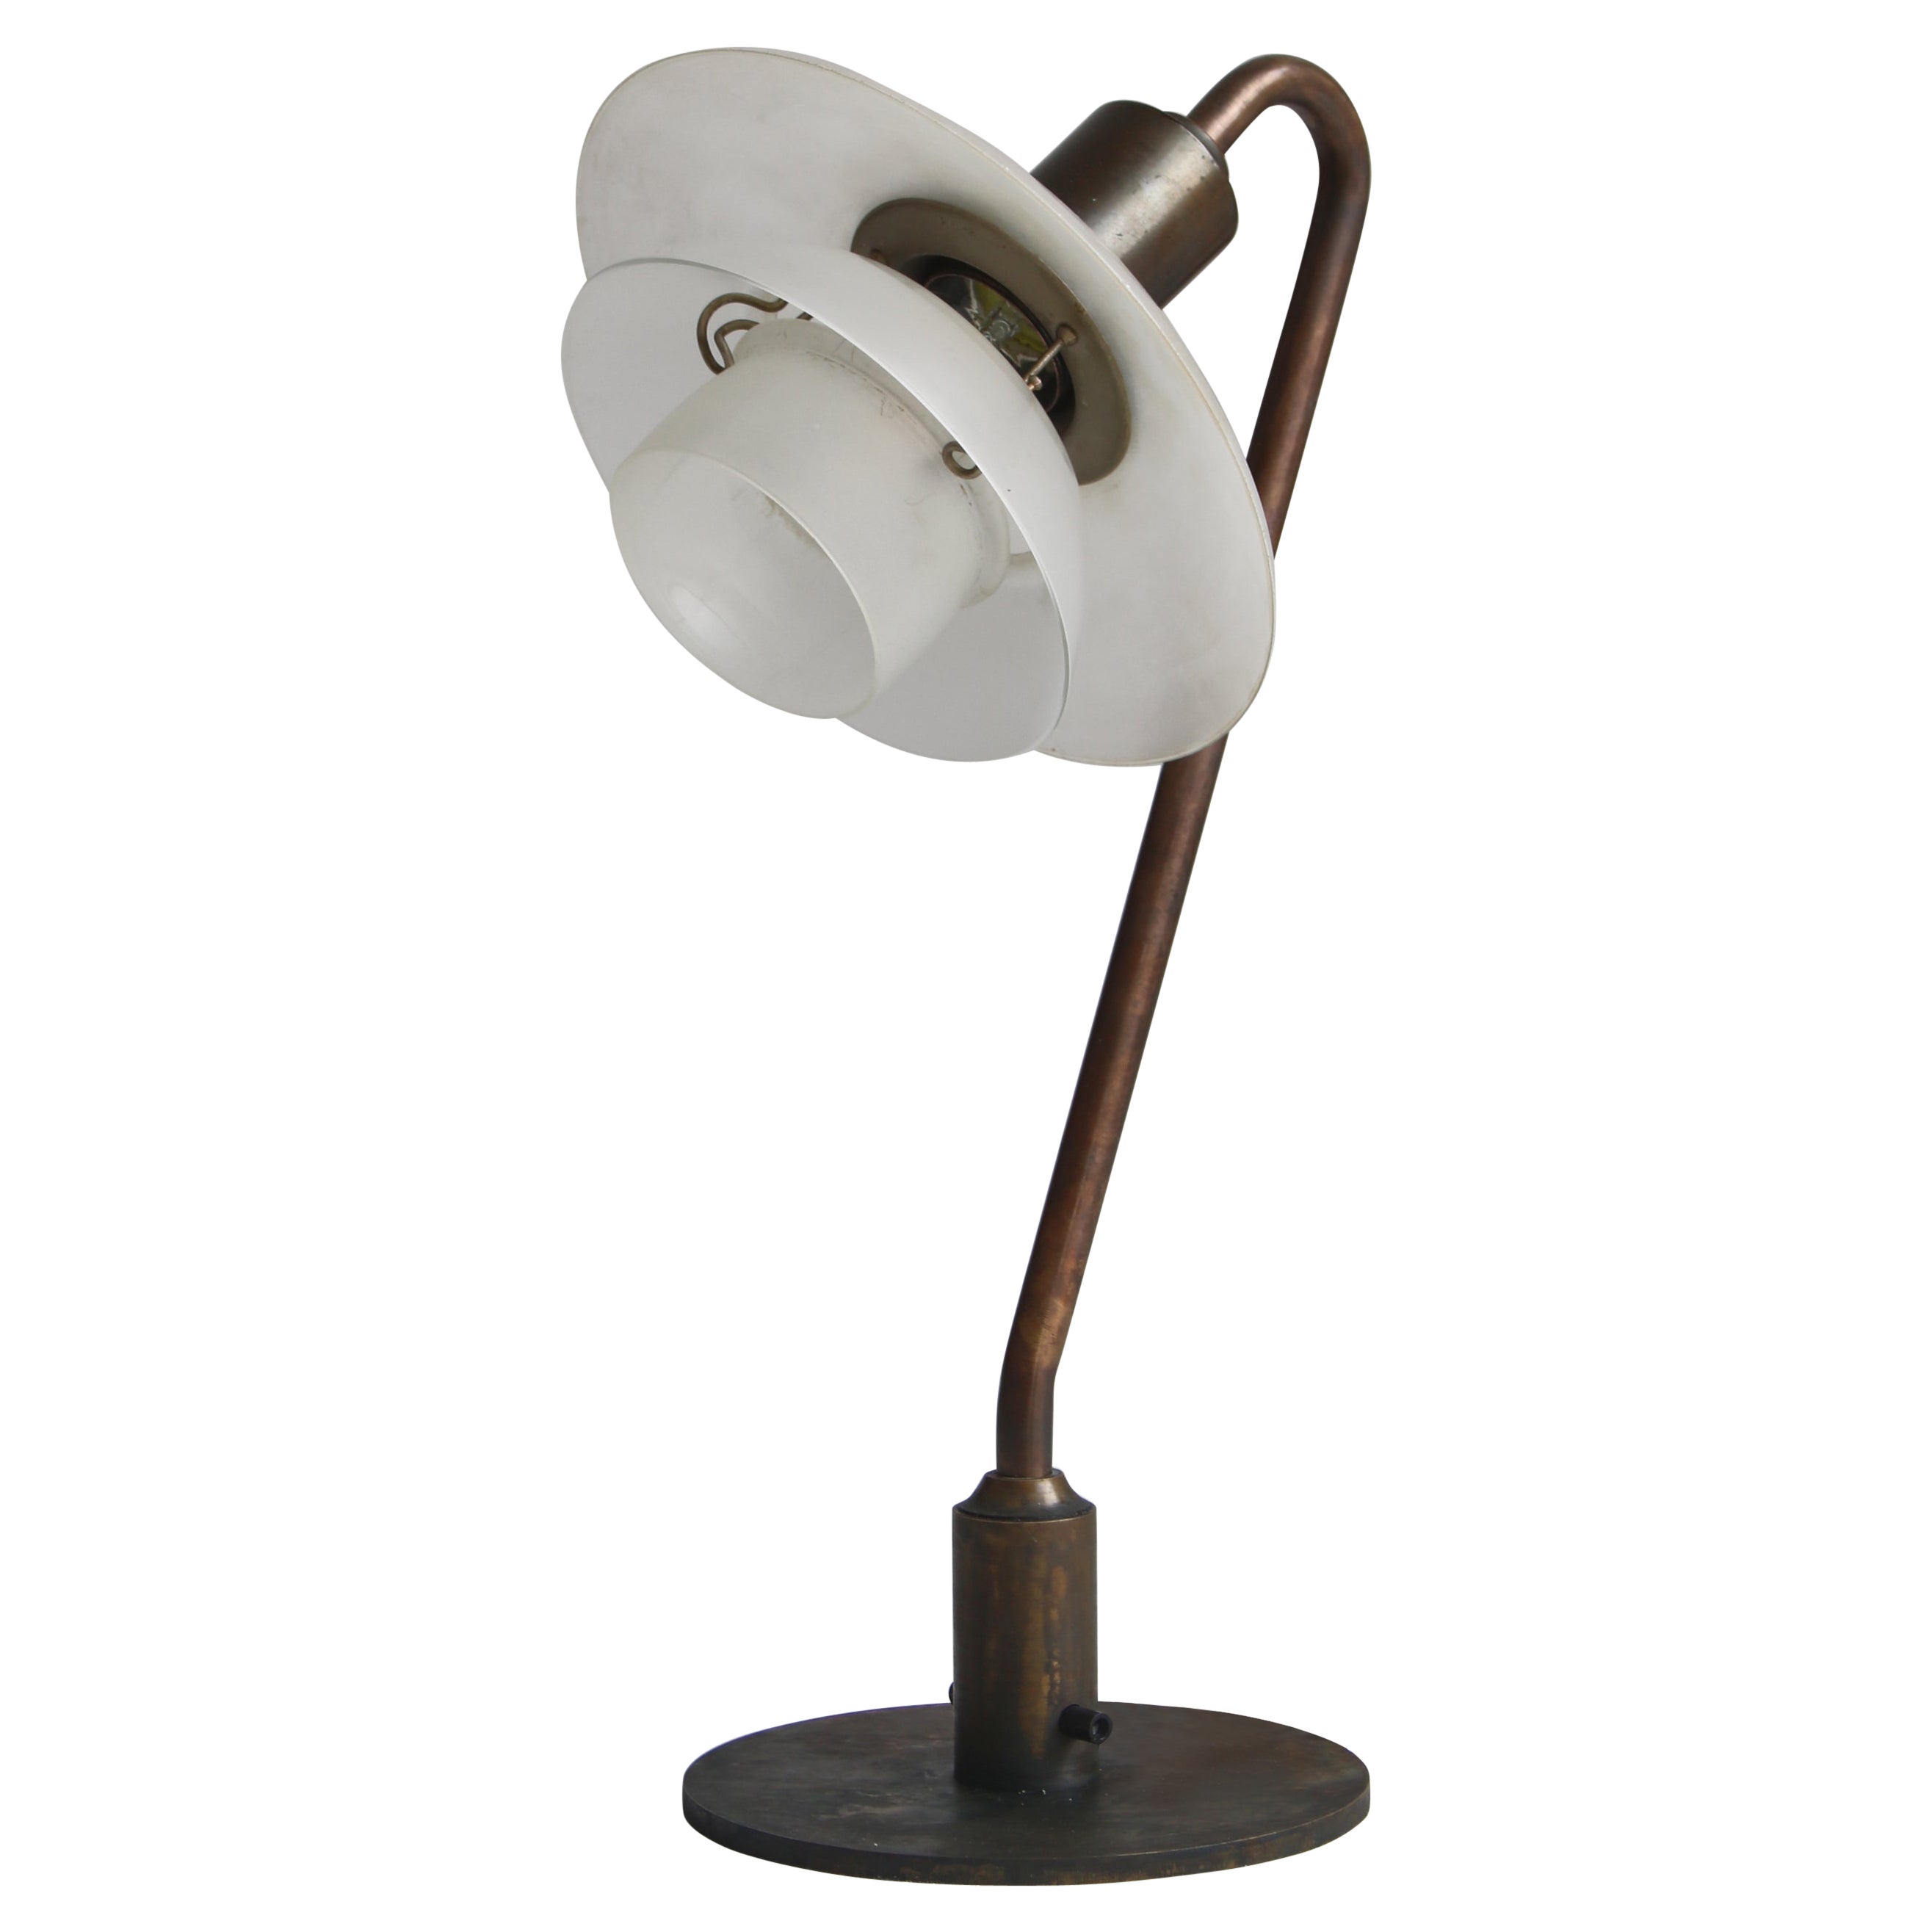 PH Table Lamp "Snowdrop" by Poul Henningsen Made at Louis Poulsen & Co. 1931